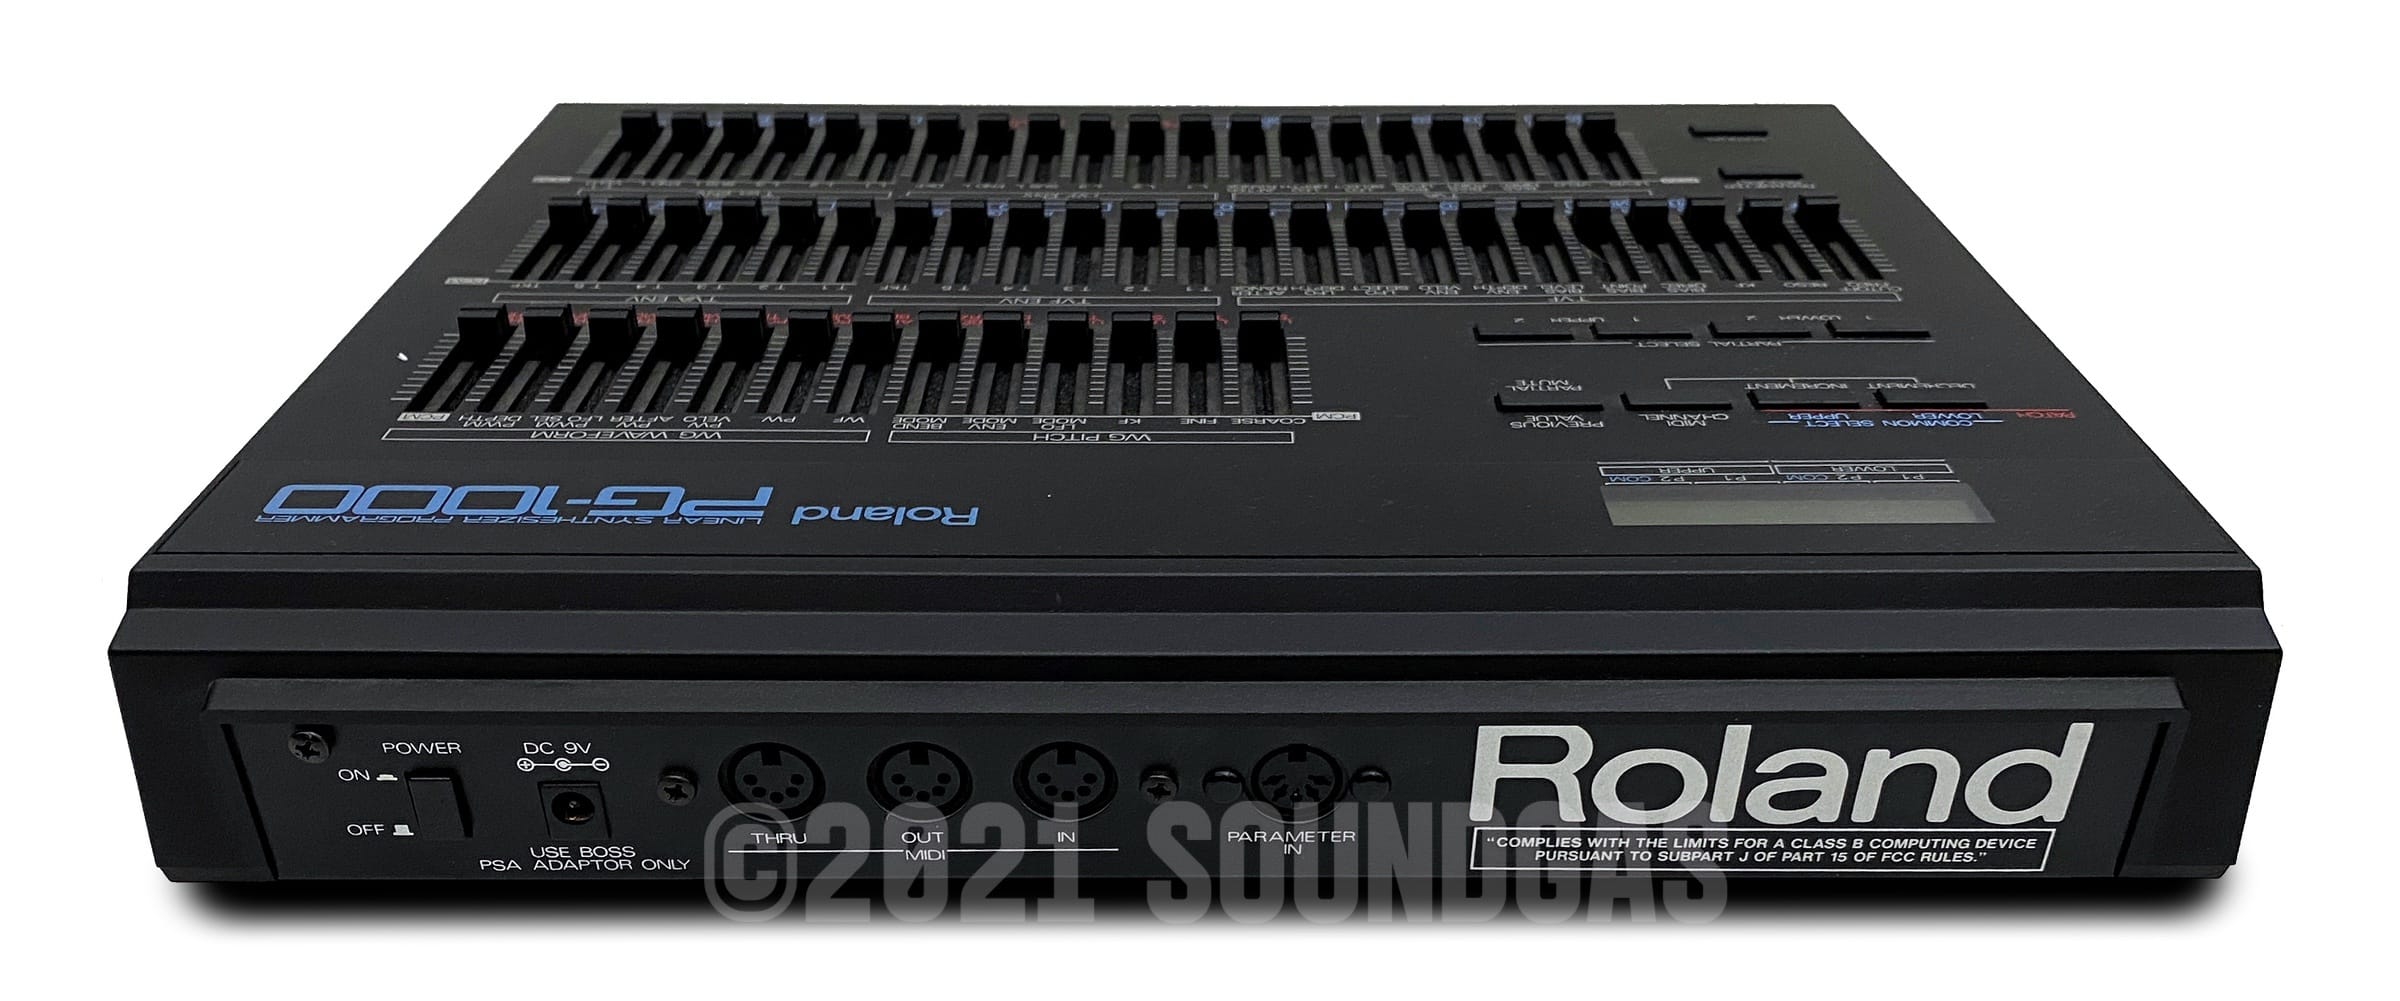 Roland PG-1000 Linear Synthesizer Programmer FOR SALE - Soundgas